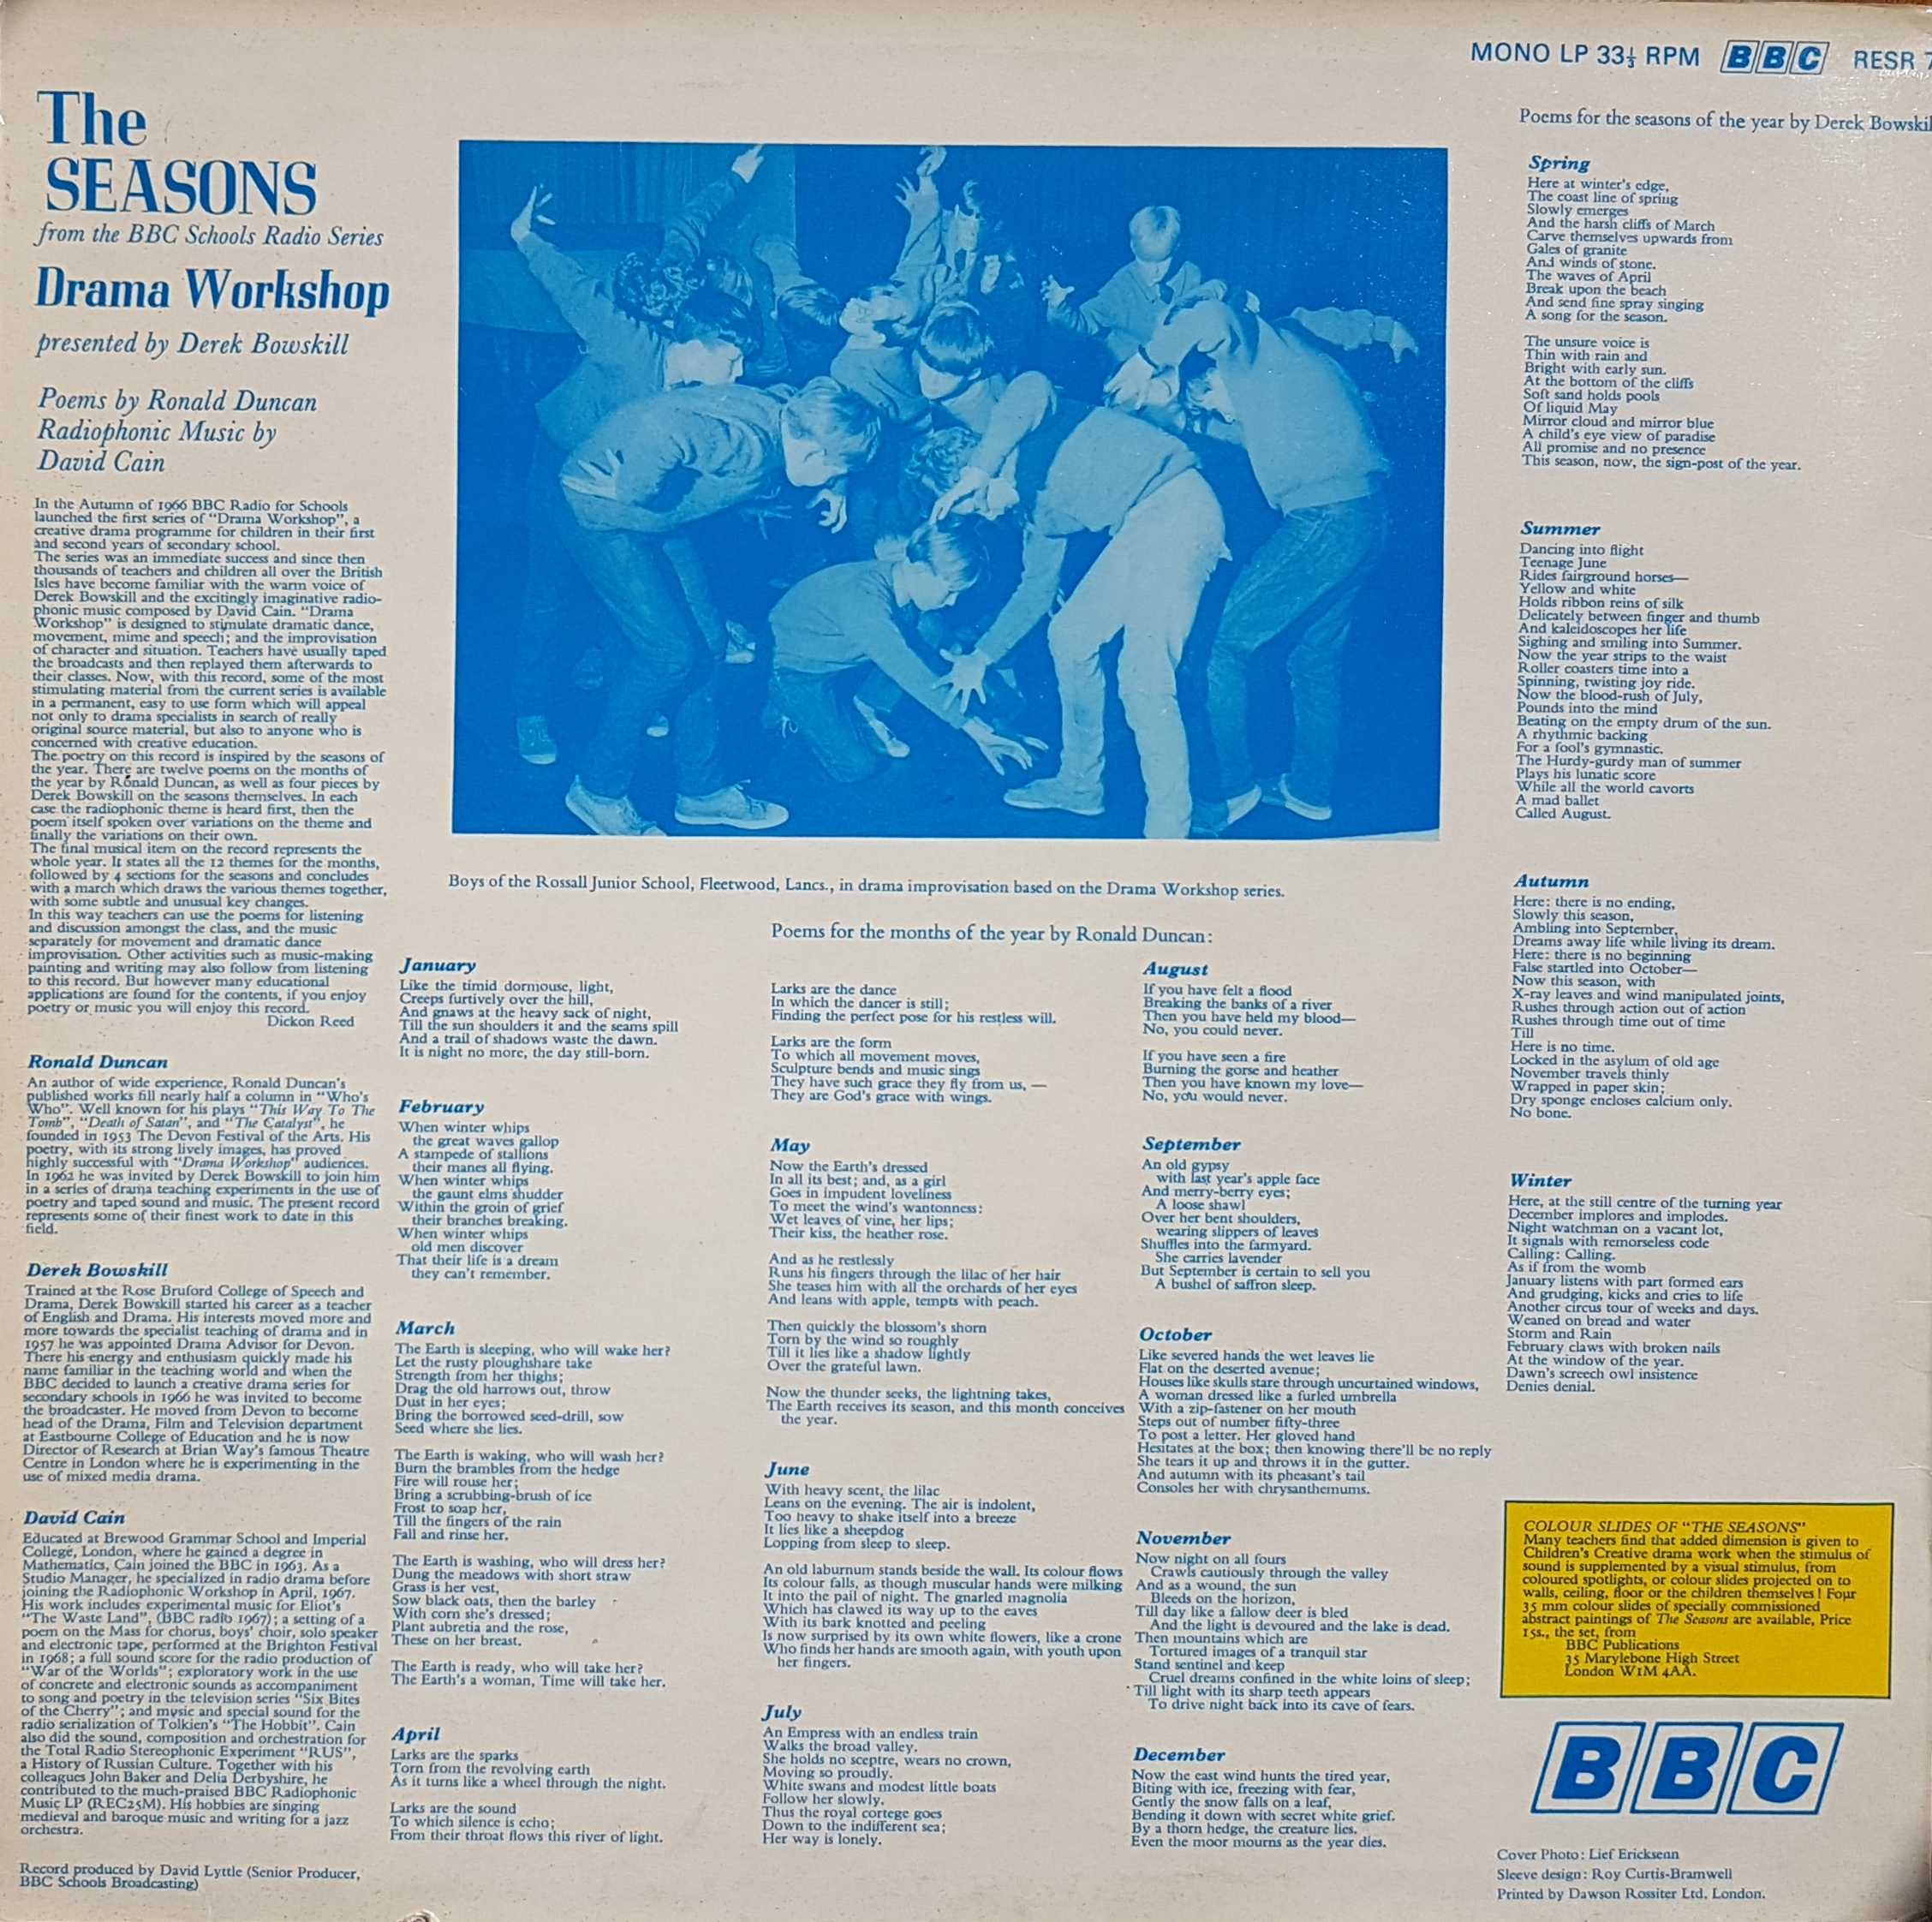 Picture of RESR 7 The seasons - Drama workshop by artist Derek Bowskill from the BBC records and Tapes library